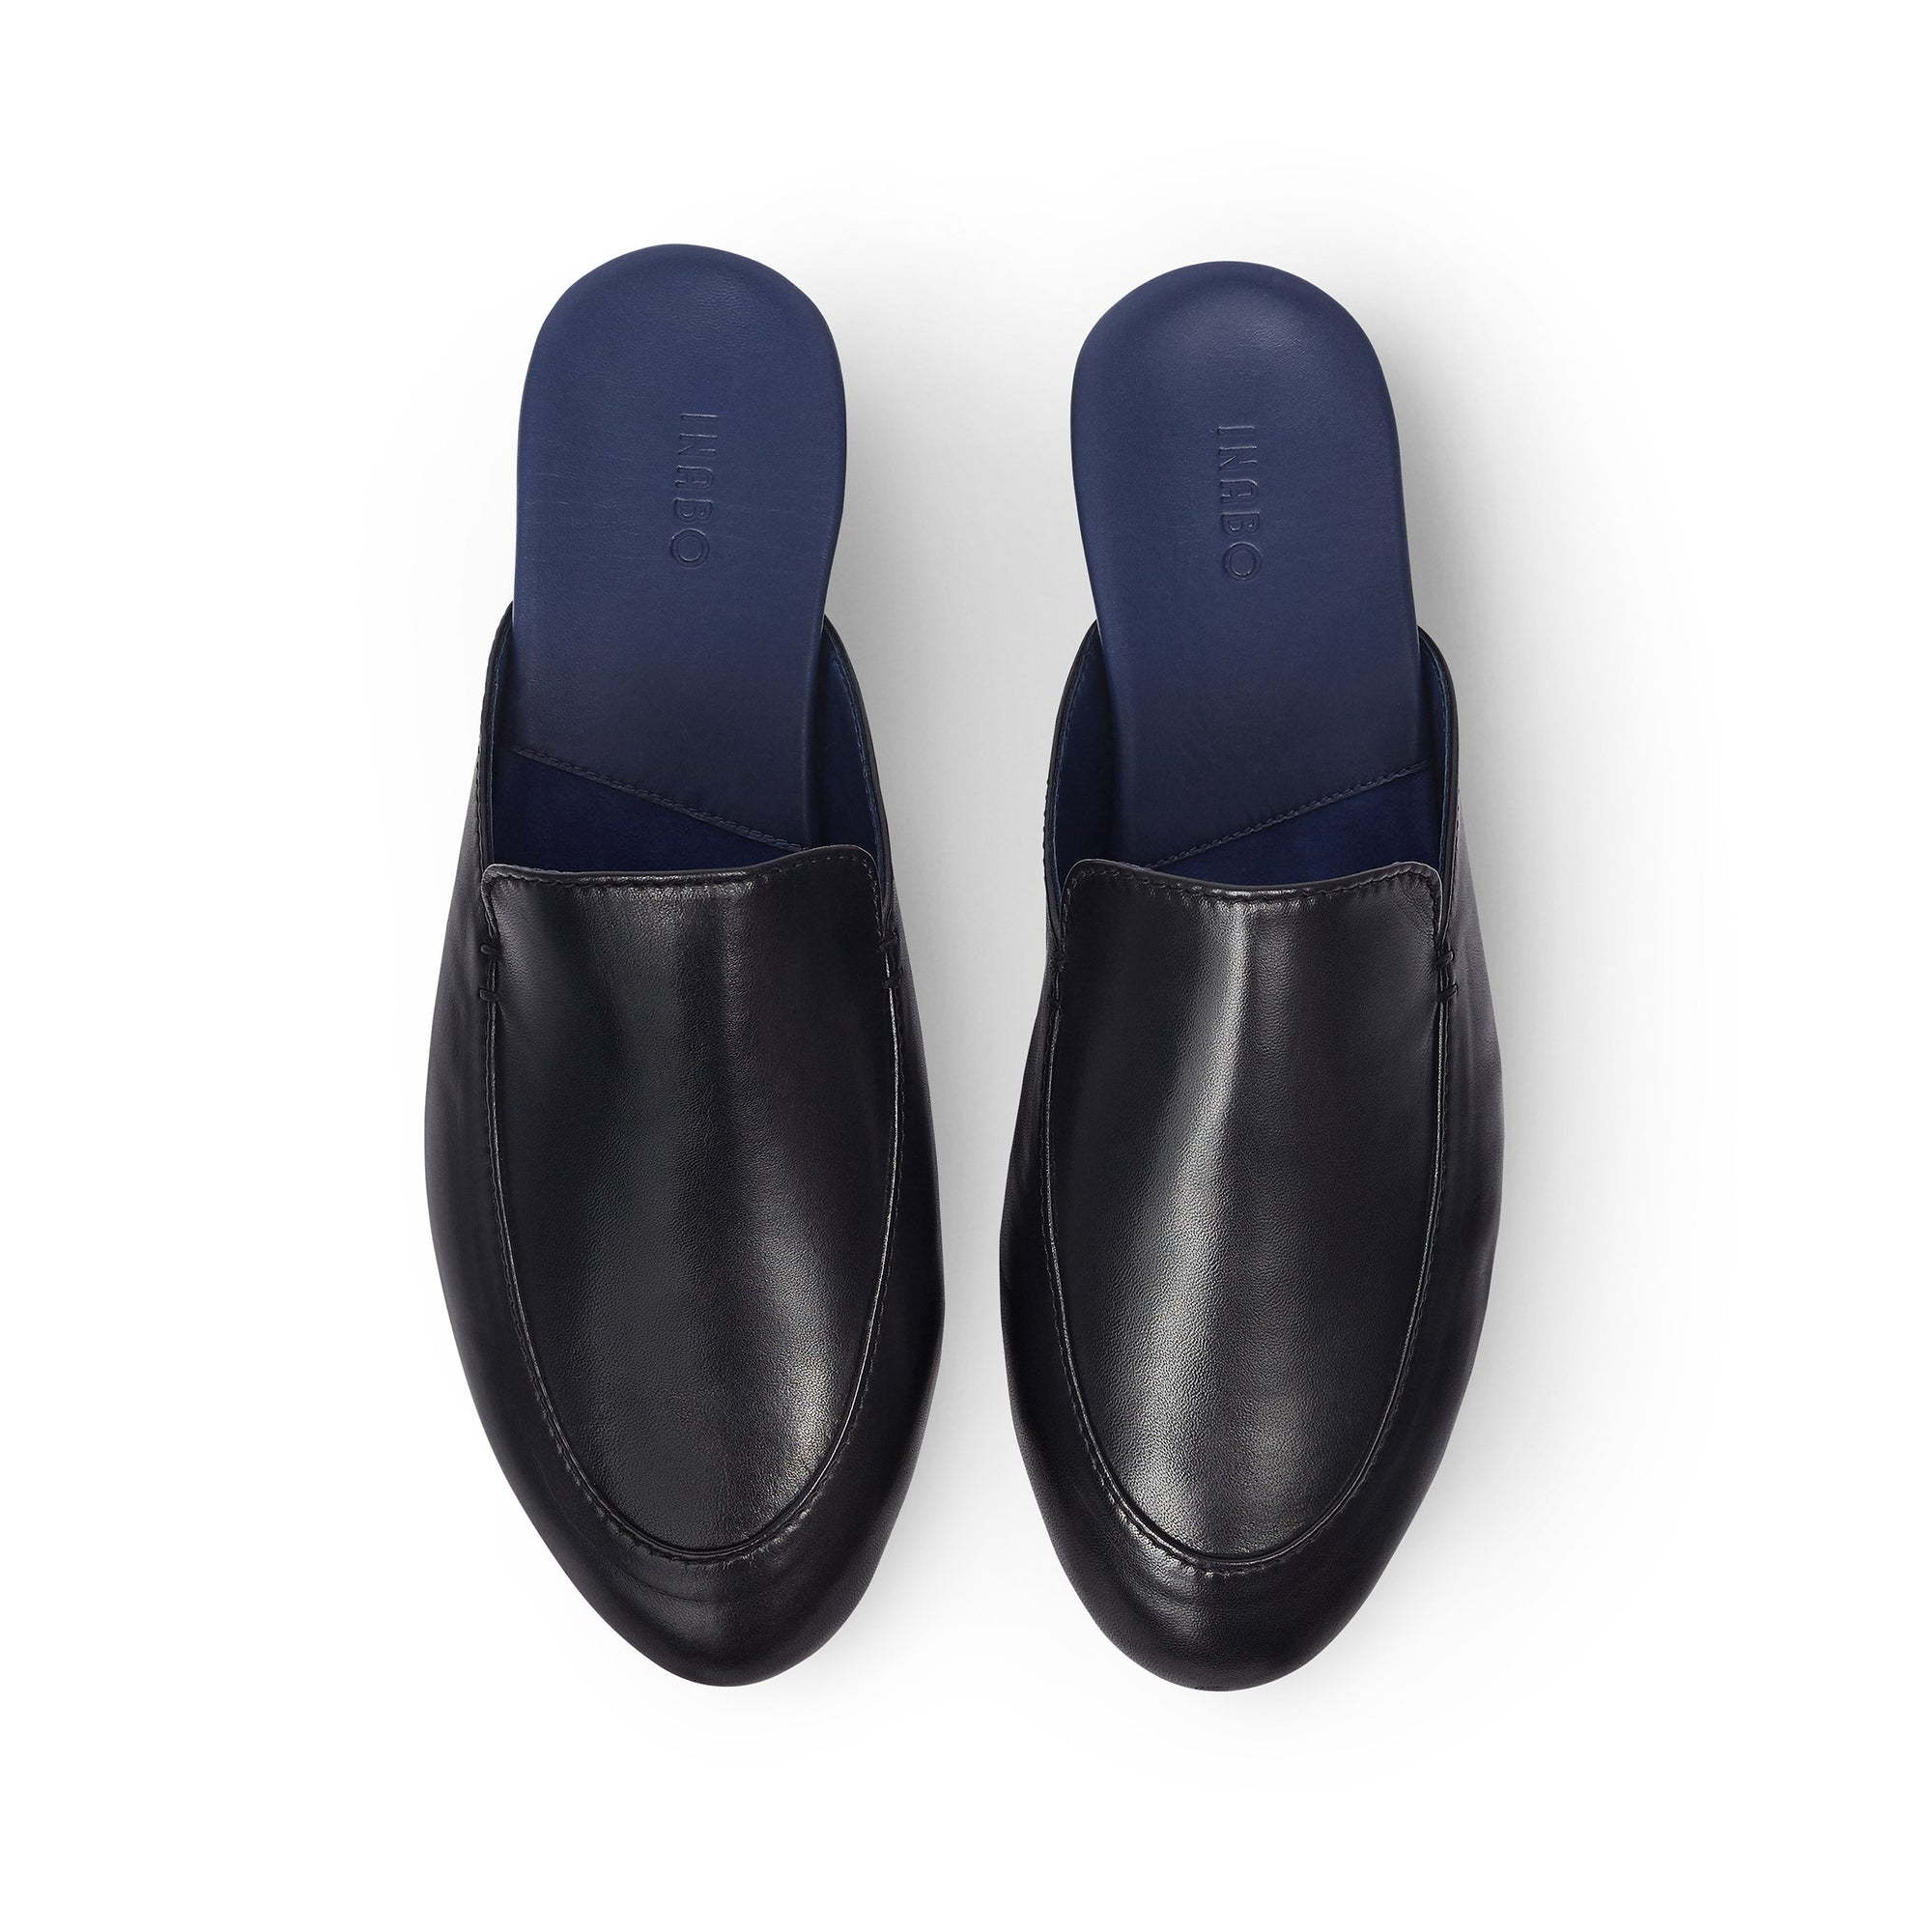 Inabo Men's Slowfer slipper in black and blue leather shown from above